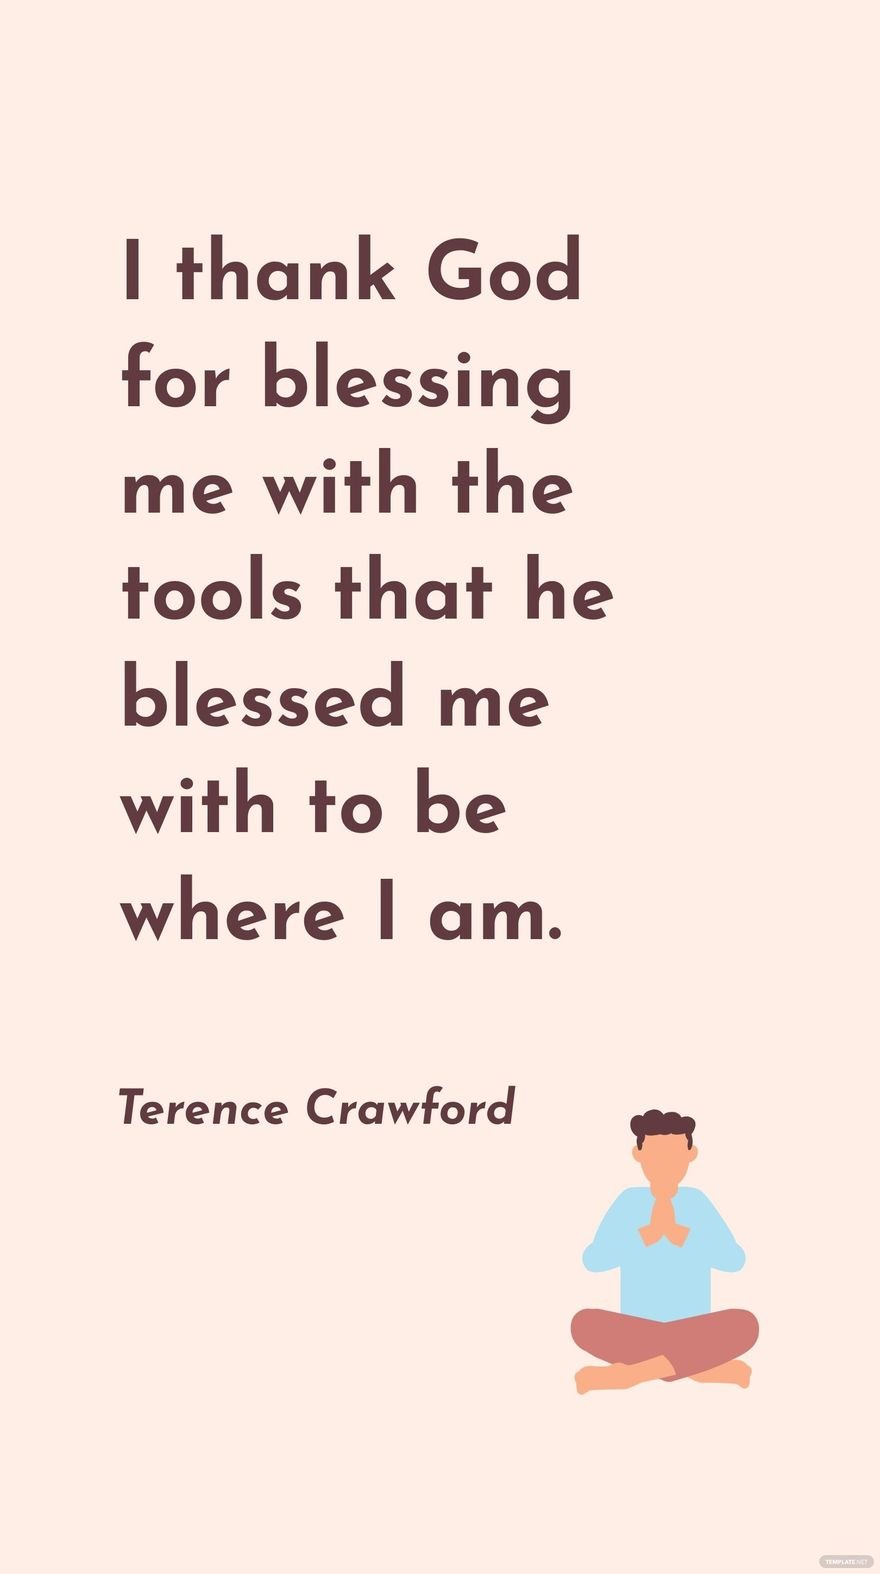 Free Terence Crawford - I thank God for blessing me with the tools that he blessed me with to be where I am. in JPG